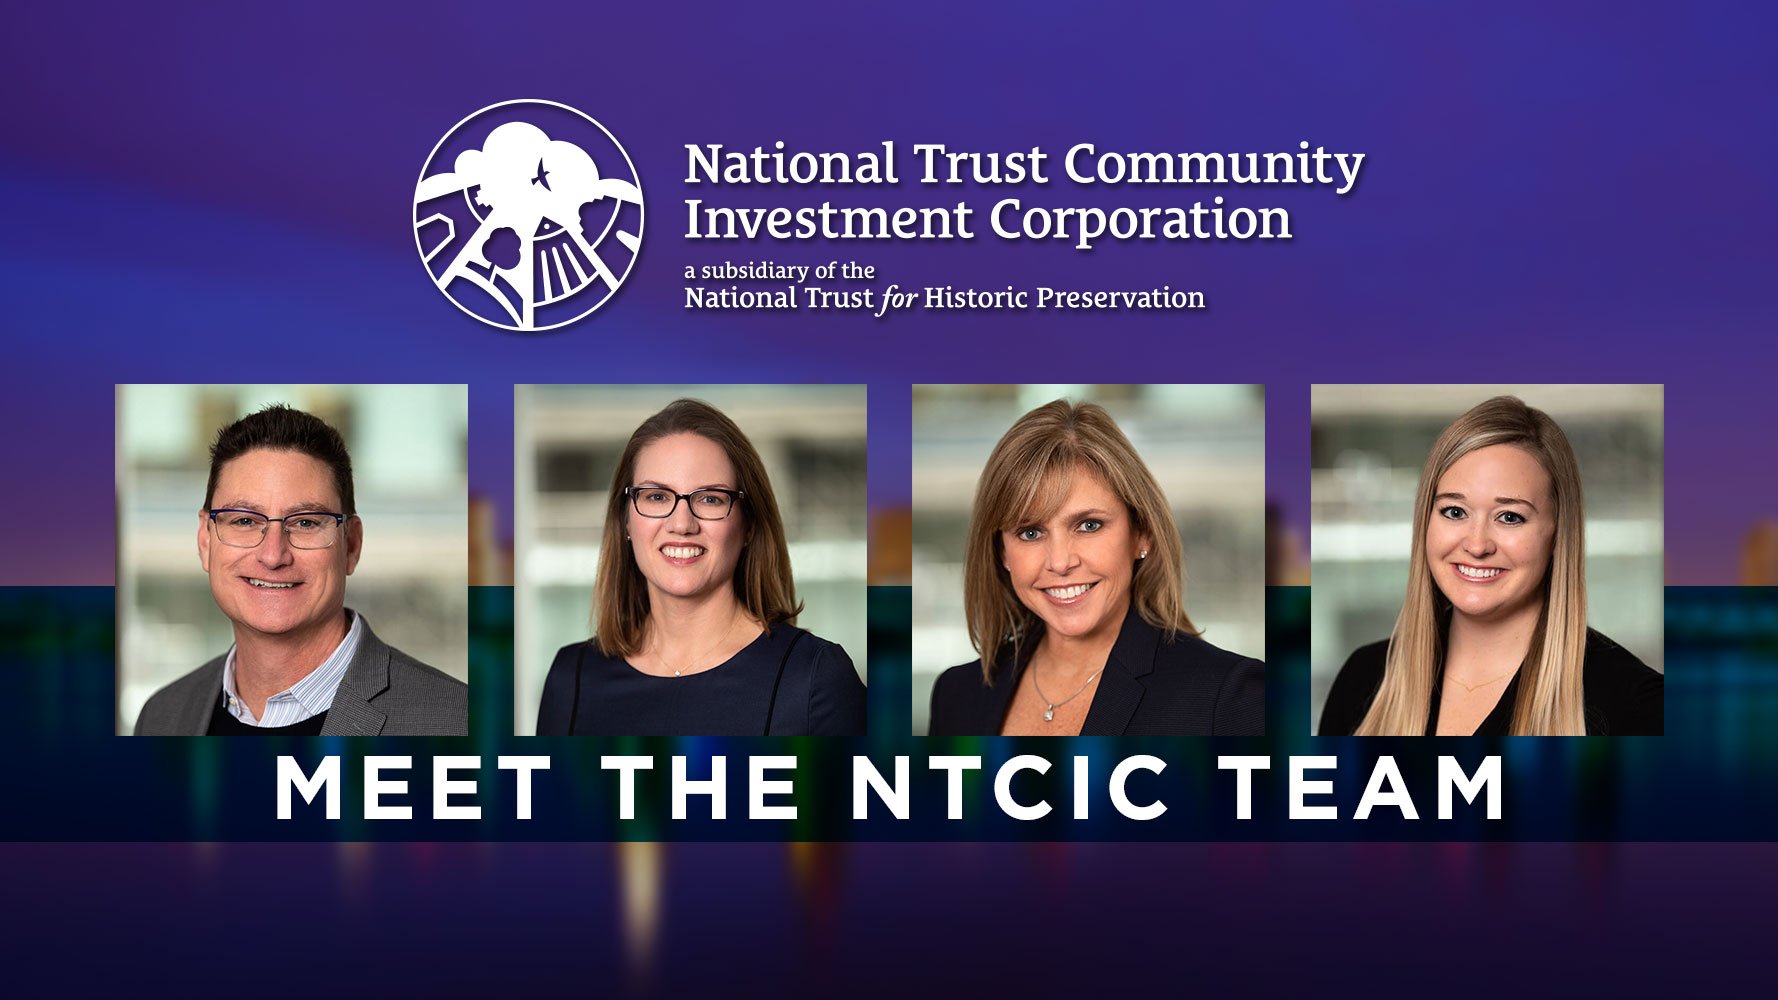 Meet NTCIC at the Novogradac NMTC Conference in San Diego